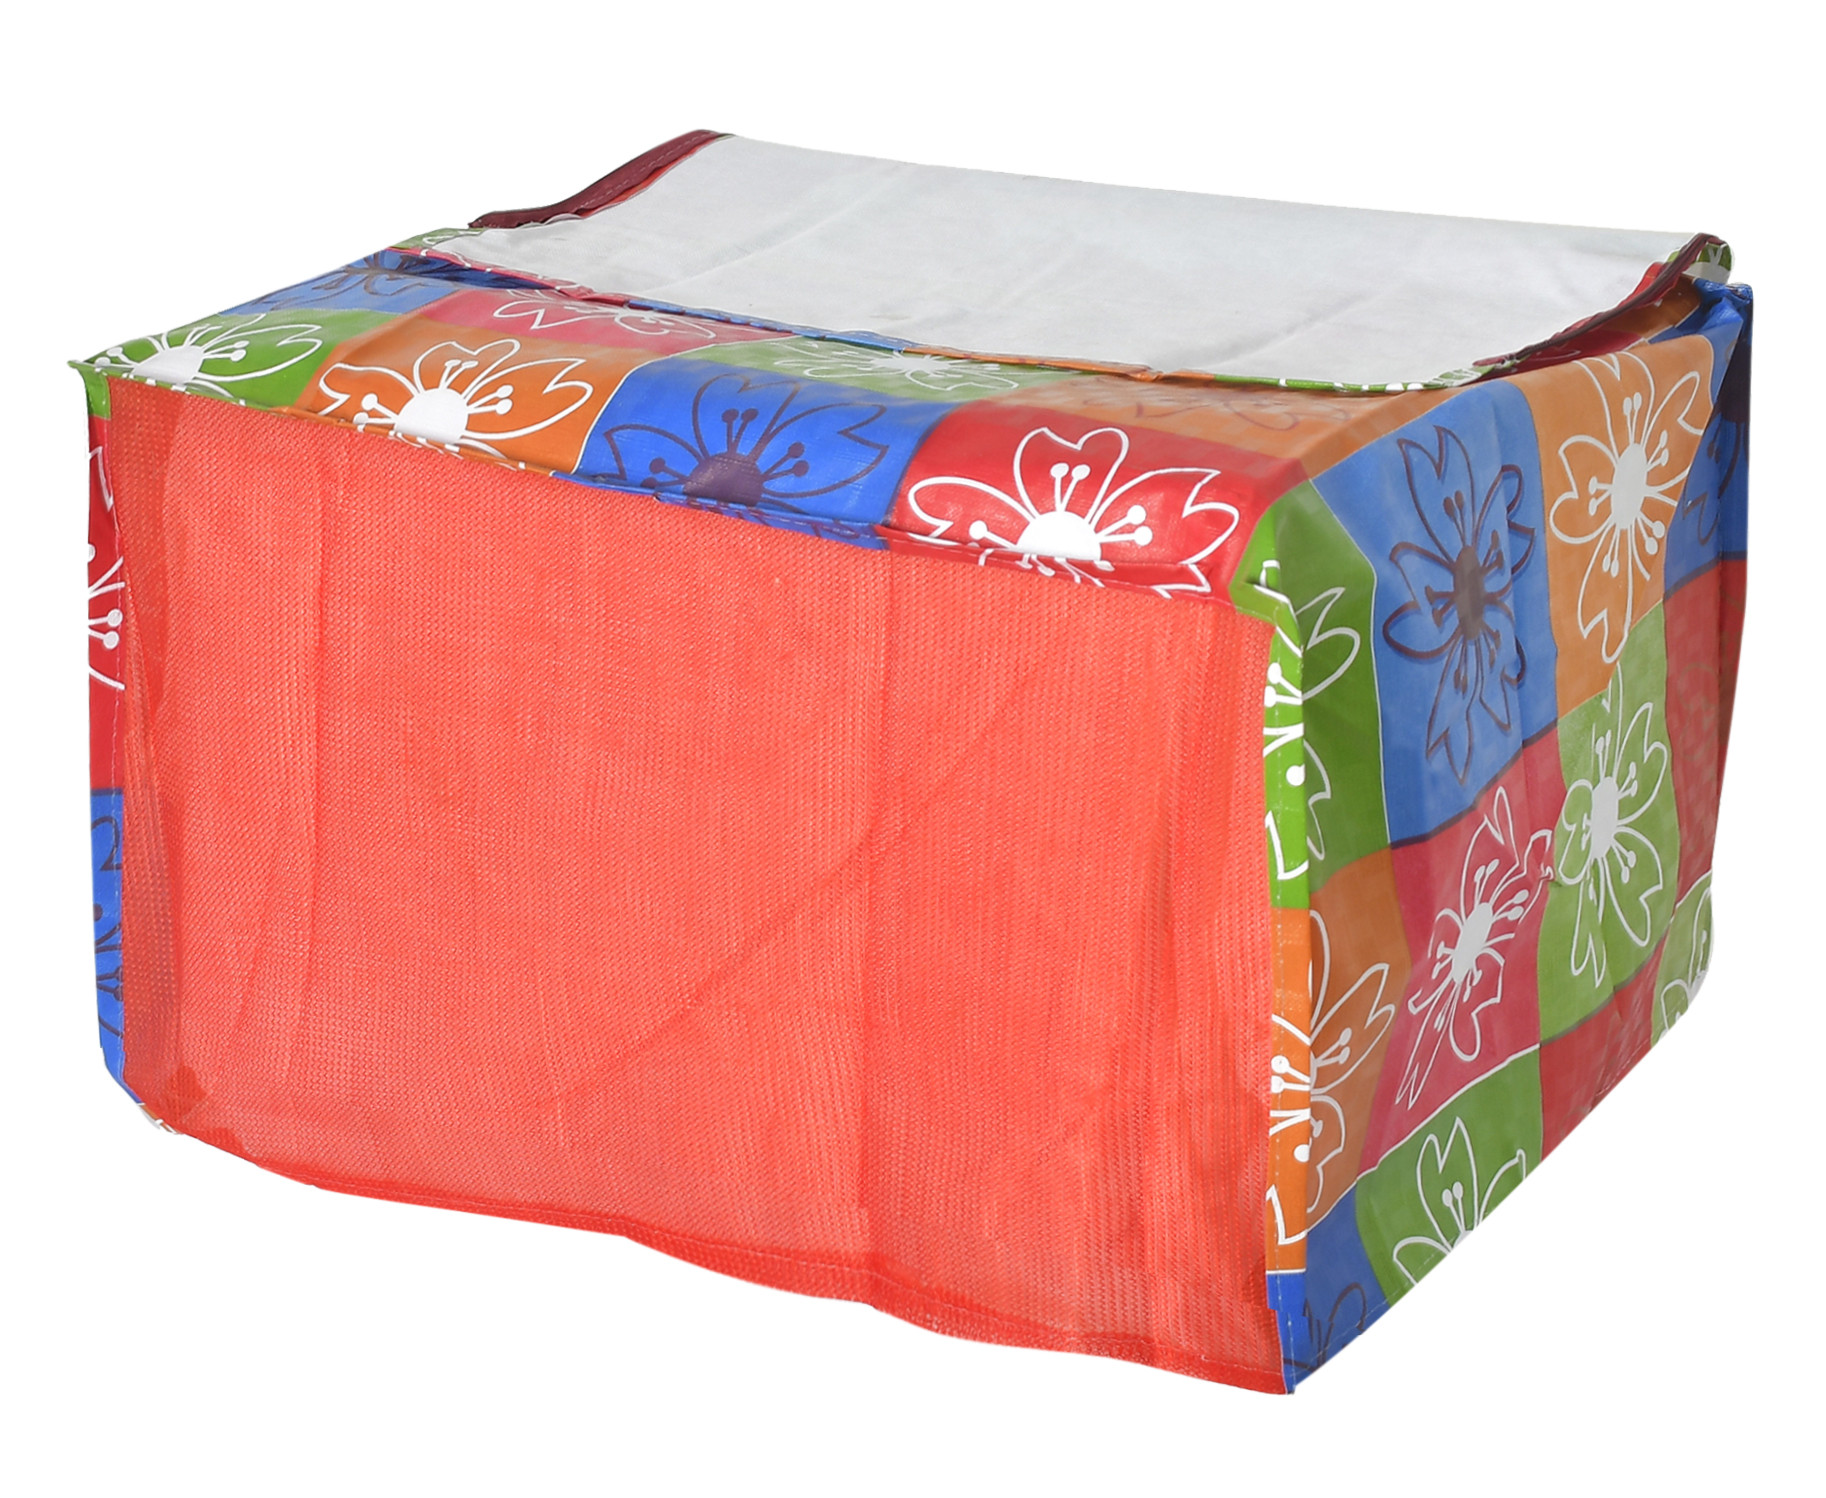 Kuber Industries PVC Flower Printed Microwave Oven Cover,25 Ltr. (Multicolor)-HS43KUBMART25949